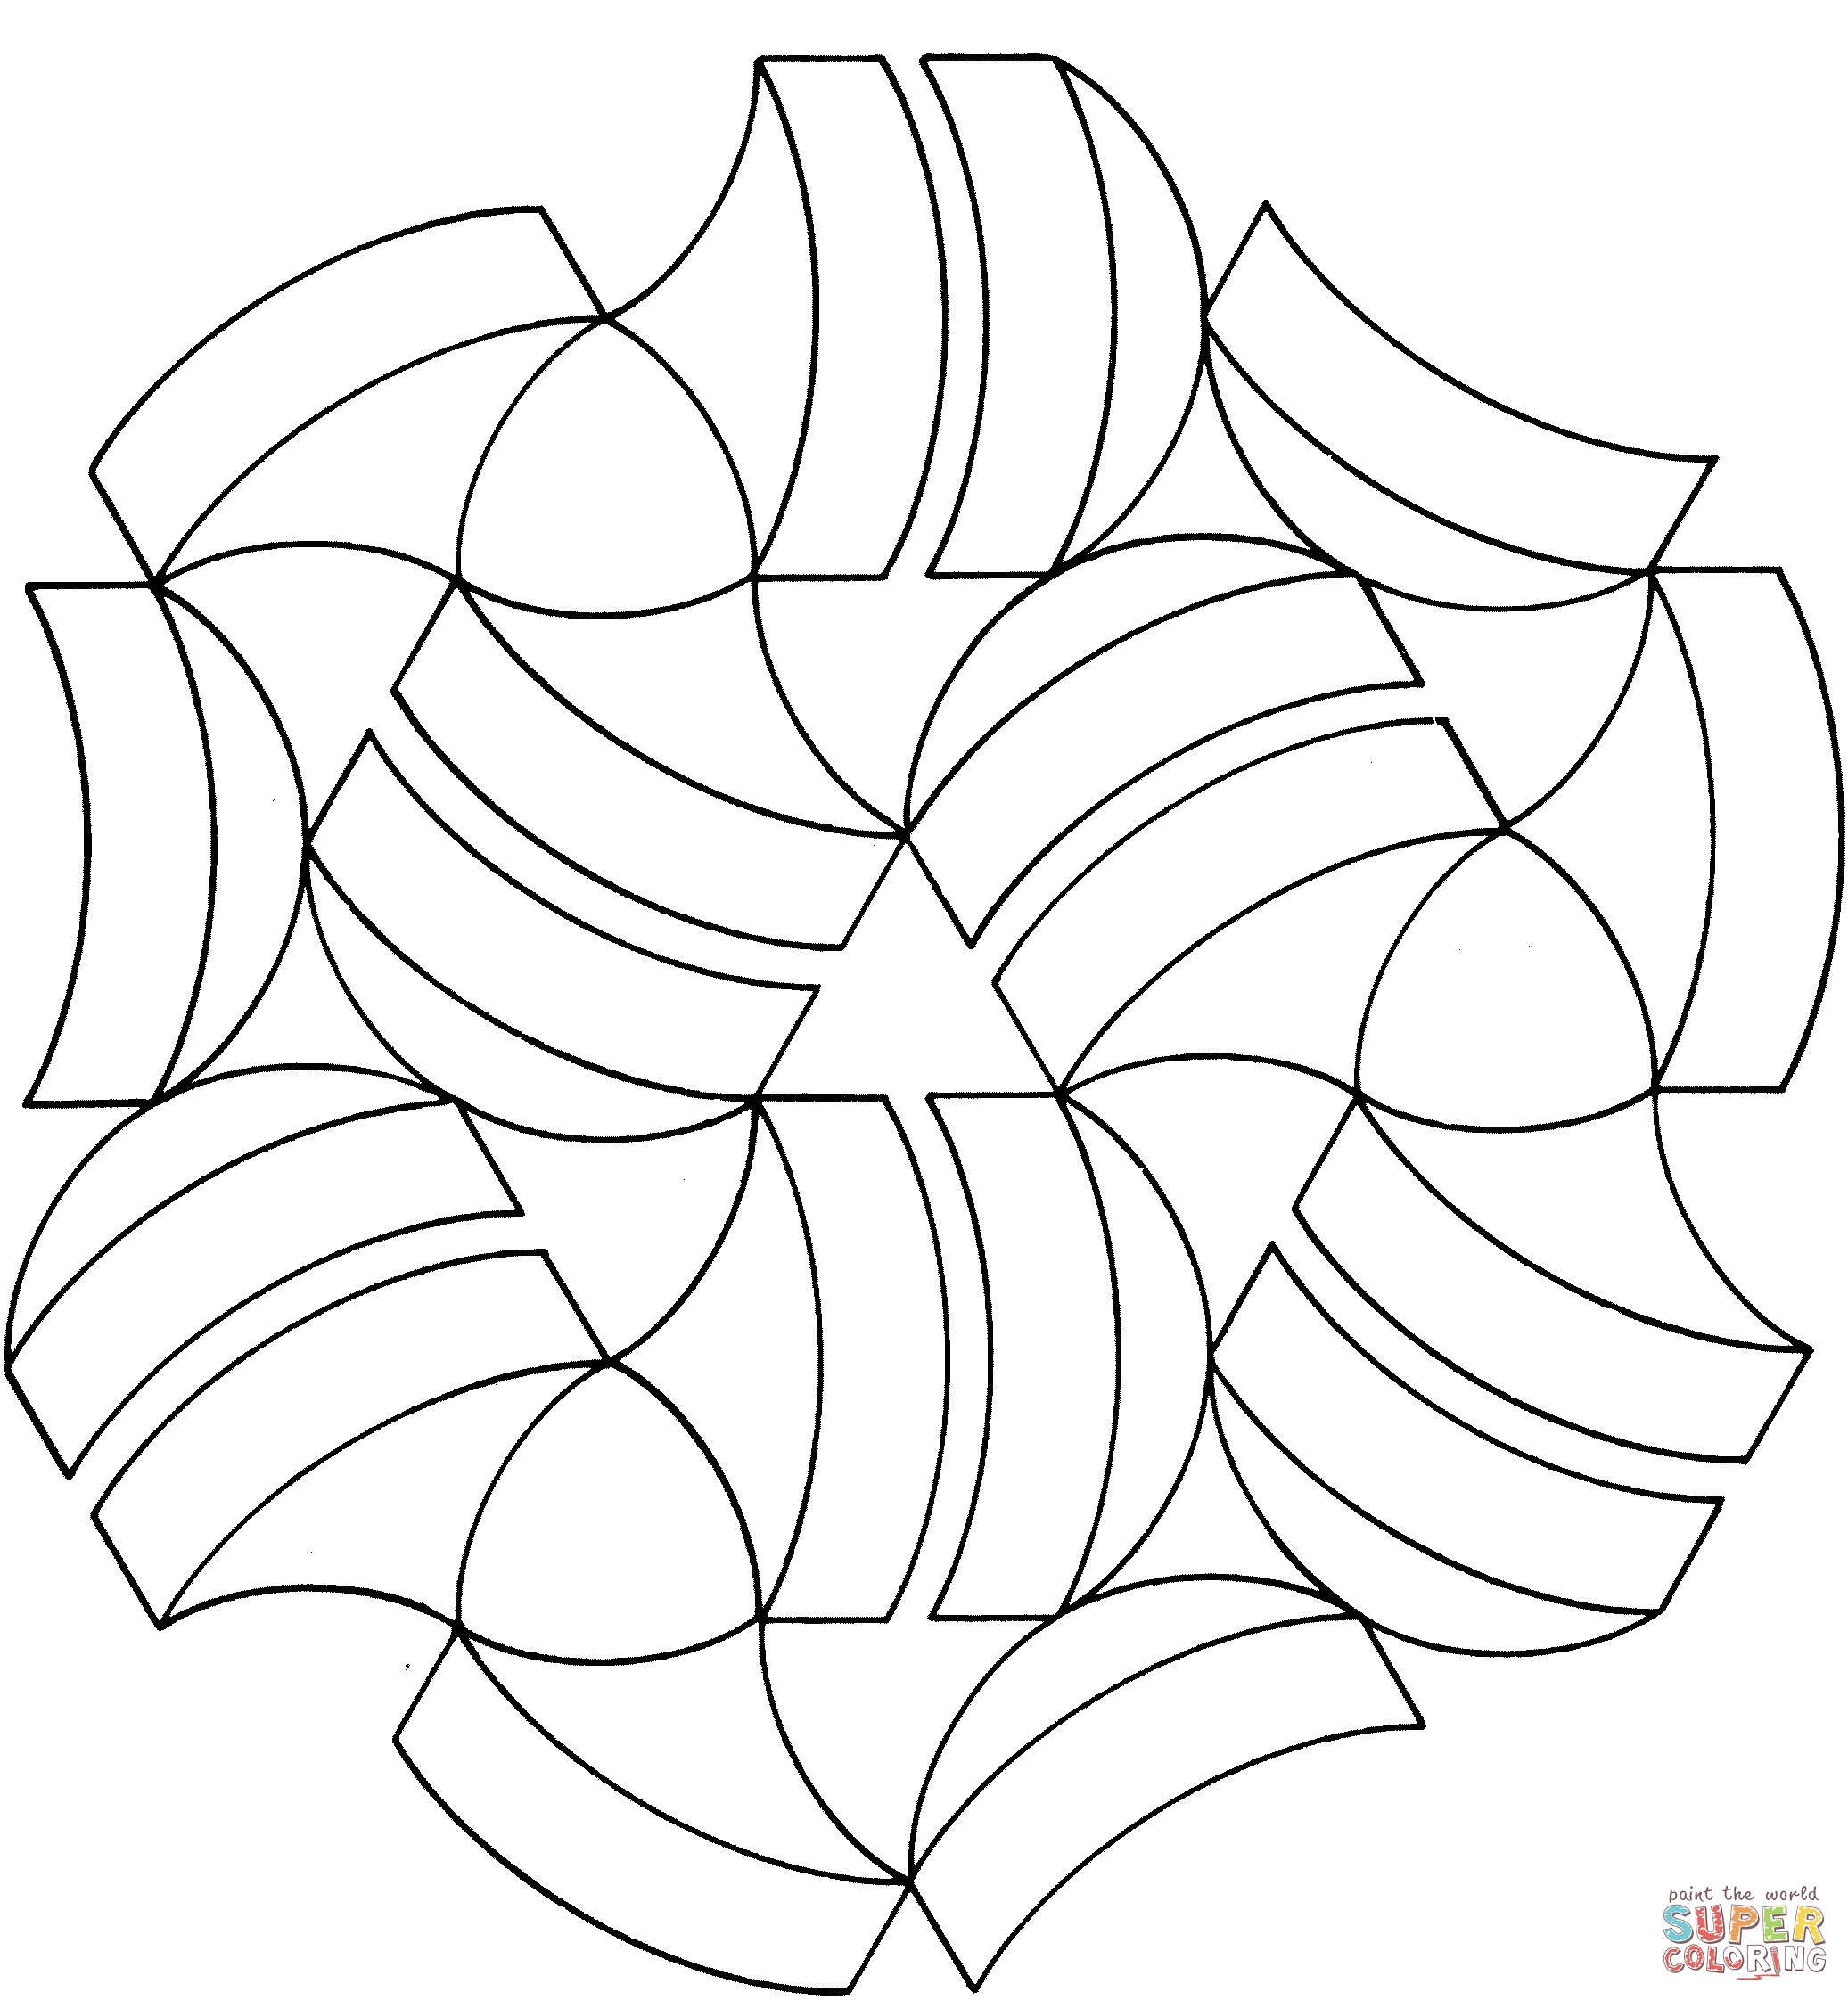 coloring pages optical illusions optical illusion 12 coloring page free printable coloring illusions pages optical 